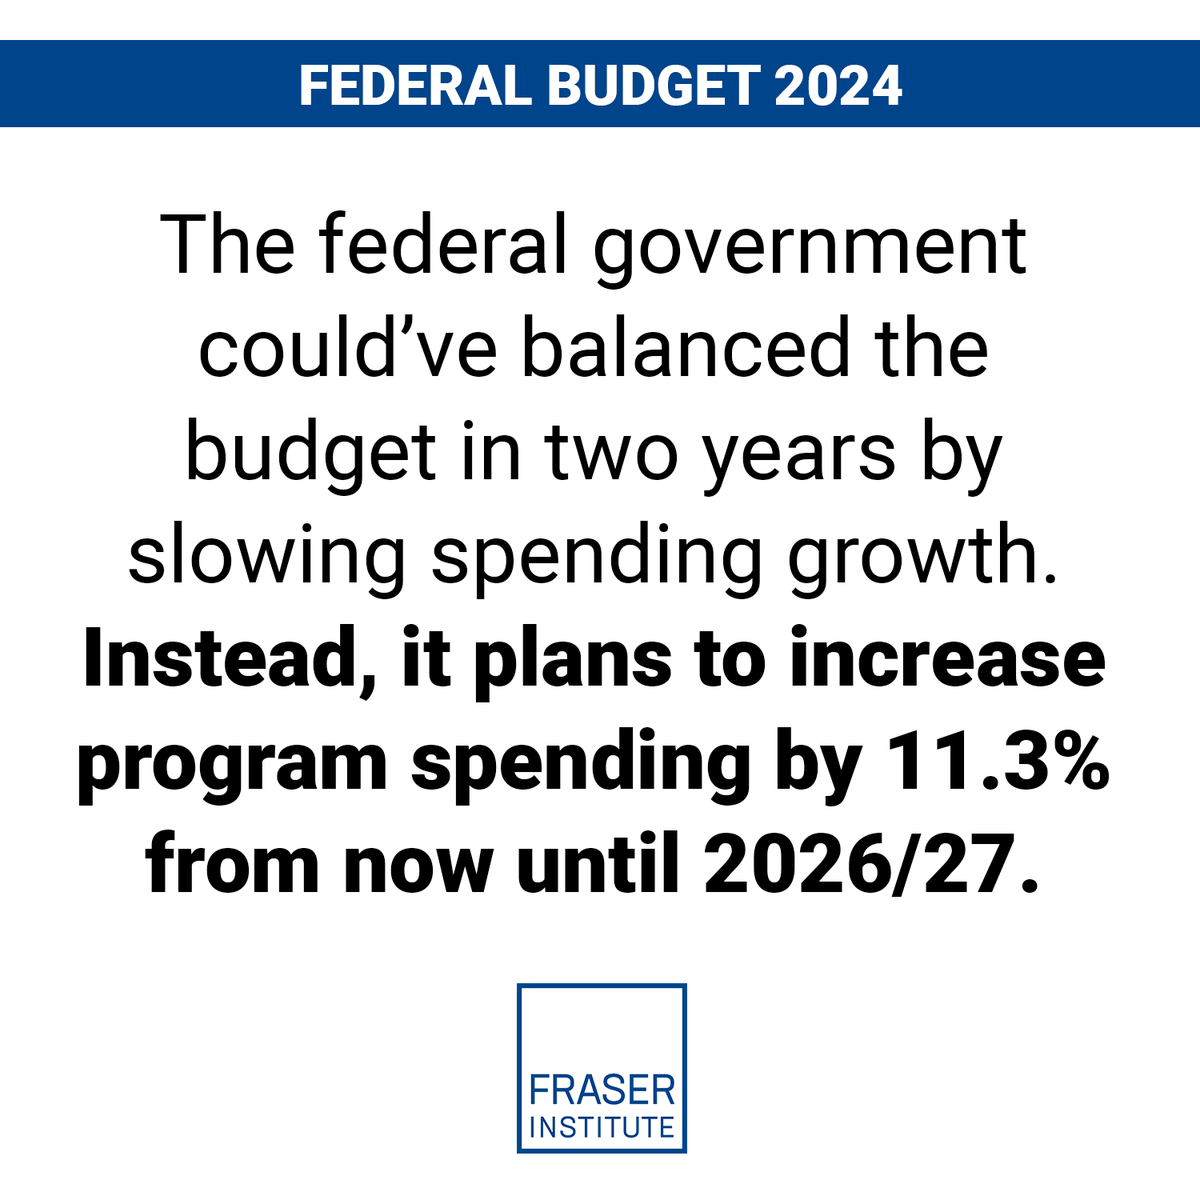 And there’s no plan for a return to balanced budgets any time soon. fraserinstitute.org/federal-budget… #cdnpoli #Budget2024